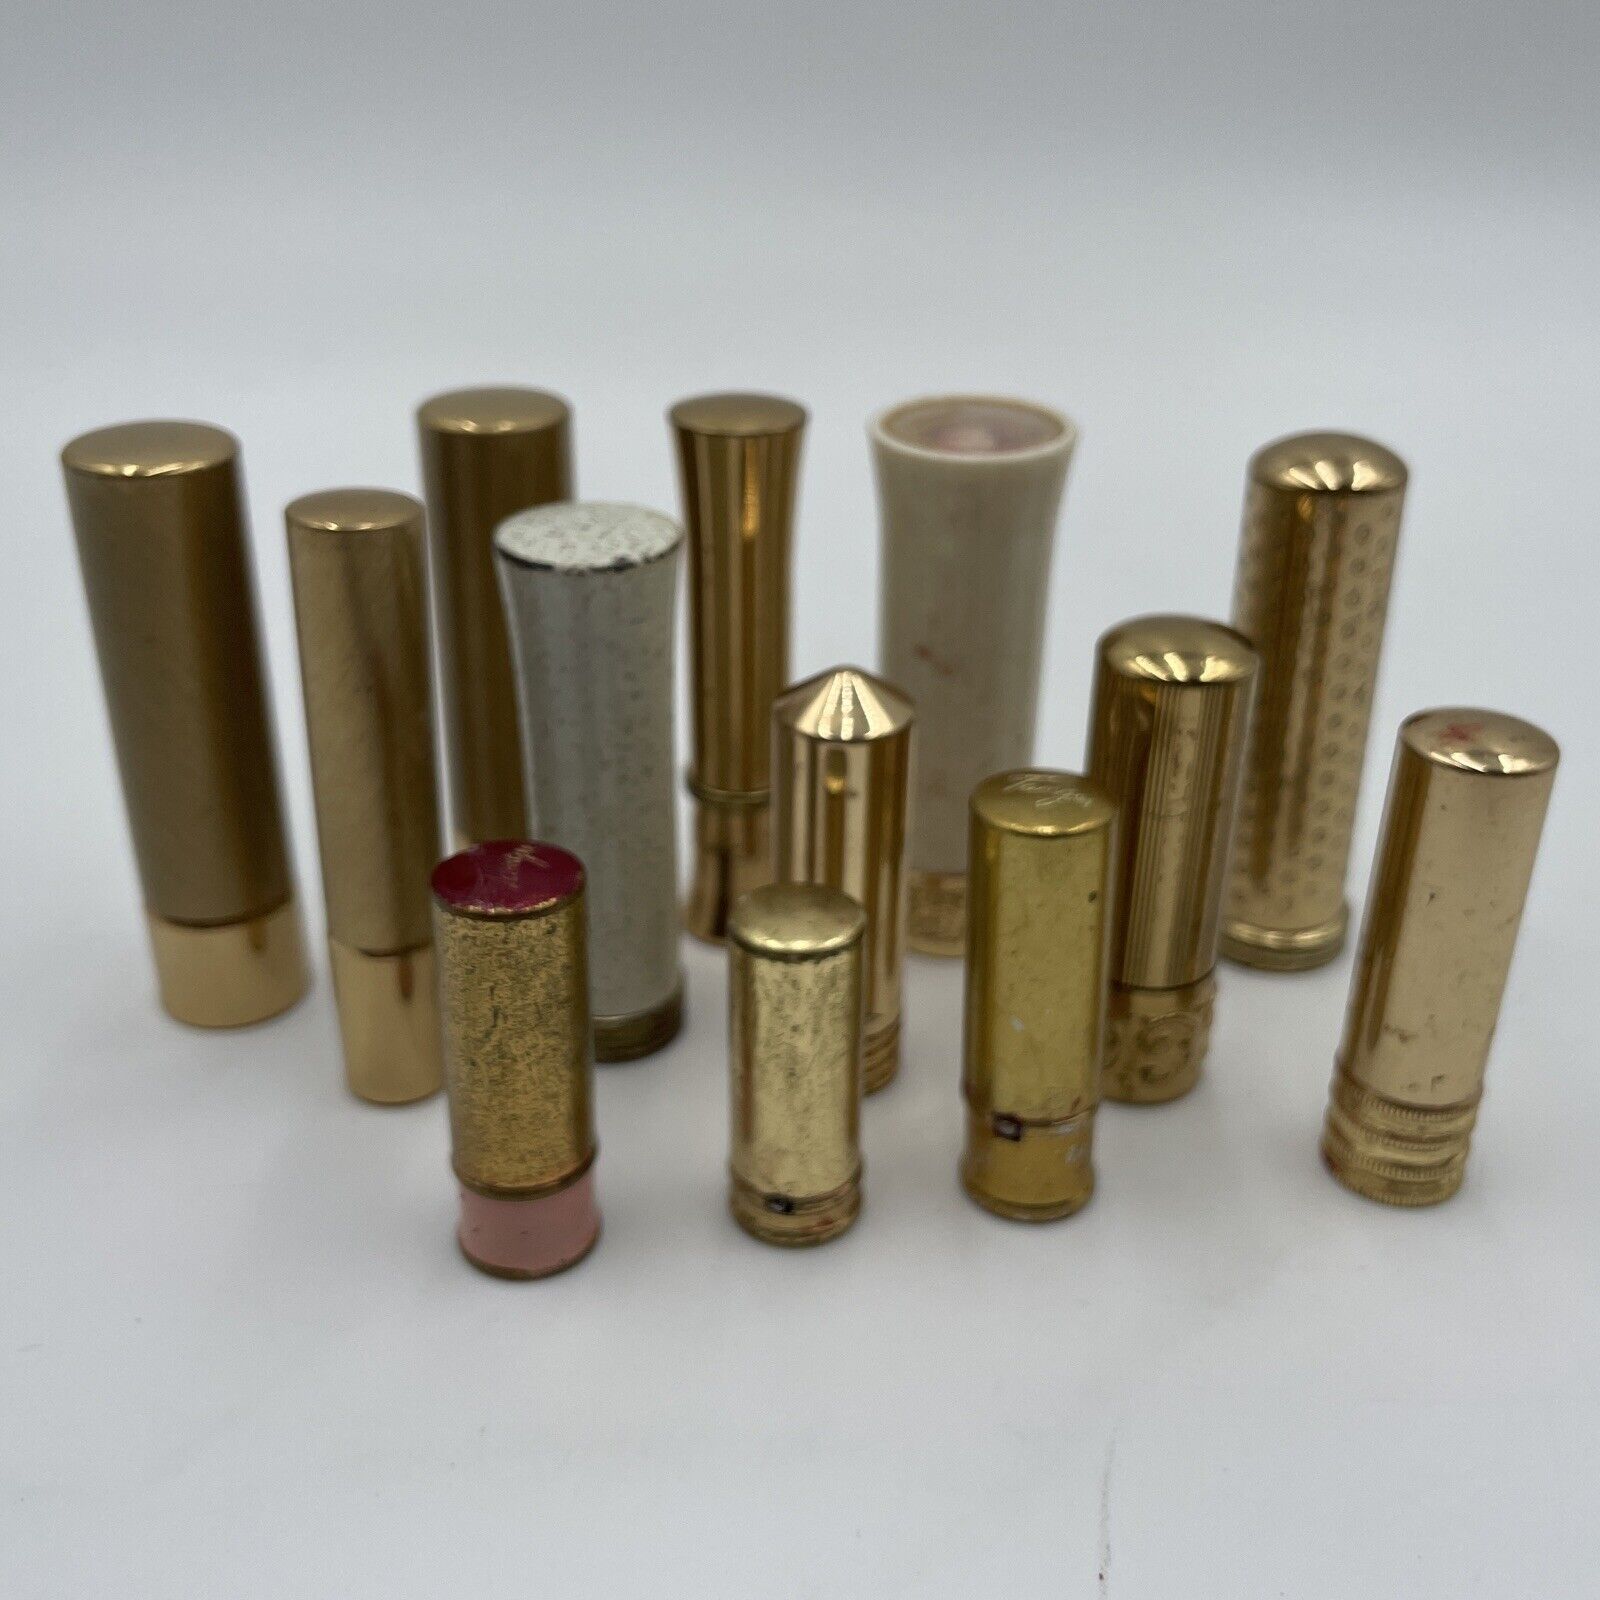 Lot of 13 Vintage Brass Lipstick Cases from the 1940s 50s Estée Lauder Tangee